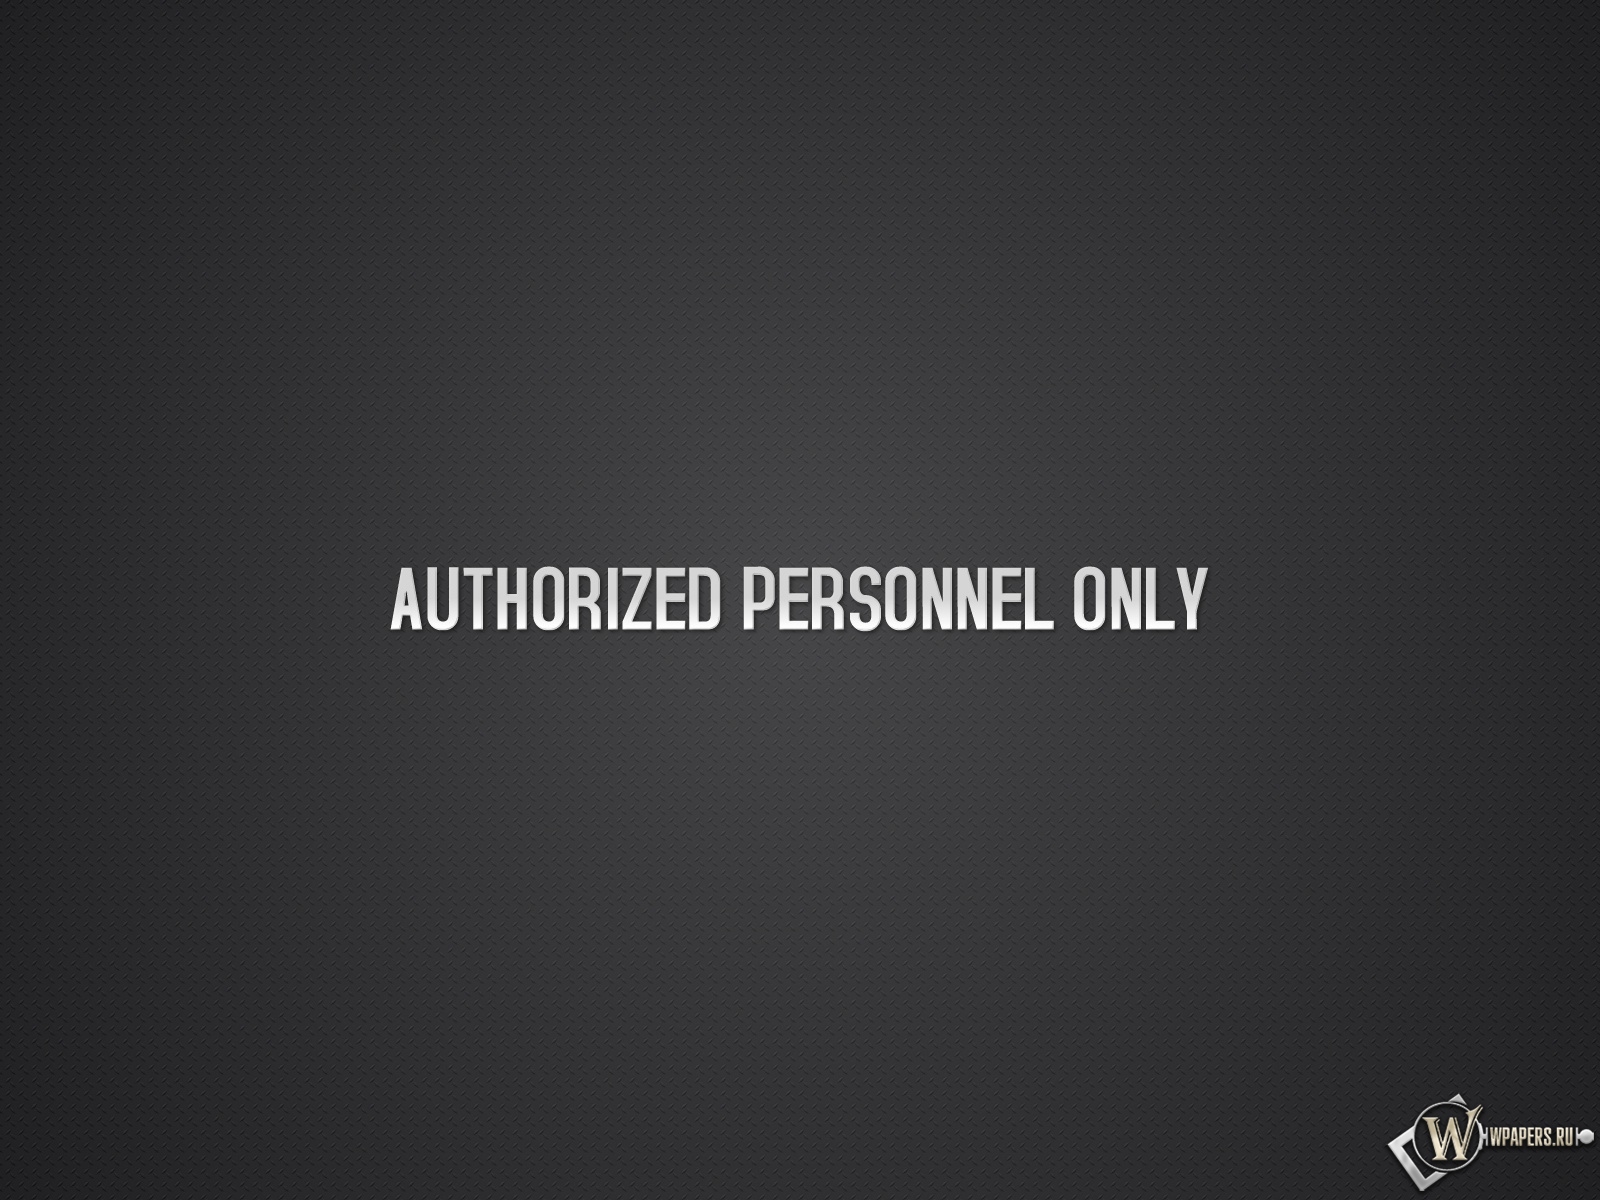 Authorized personnel only 1600x1200